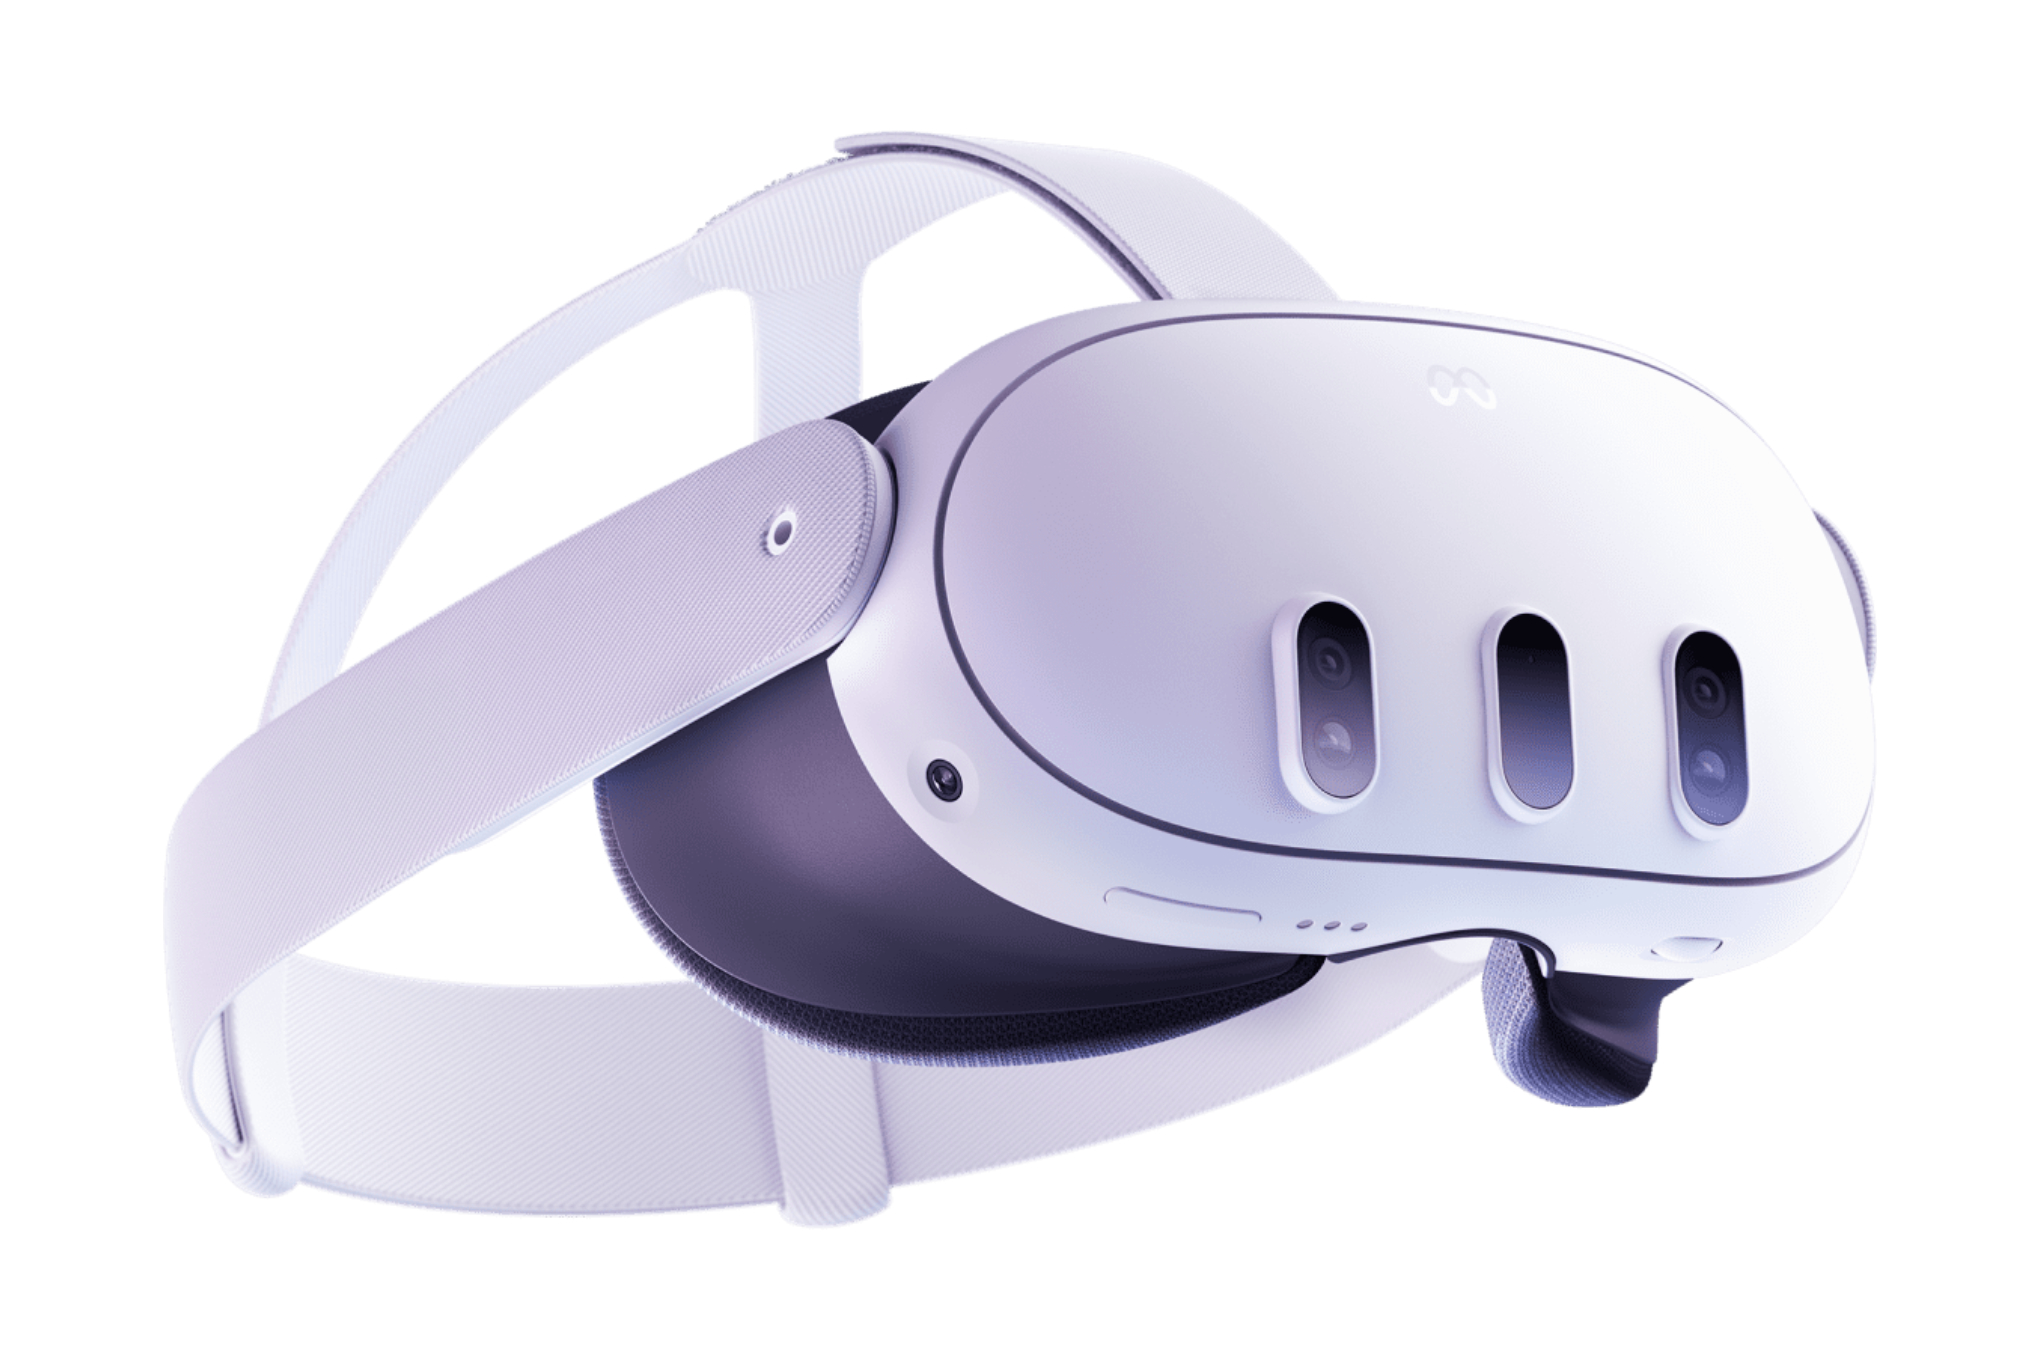 A Meta Quest 3 mixed reality headset is pictured, with its front, side, and bottom revealed. 